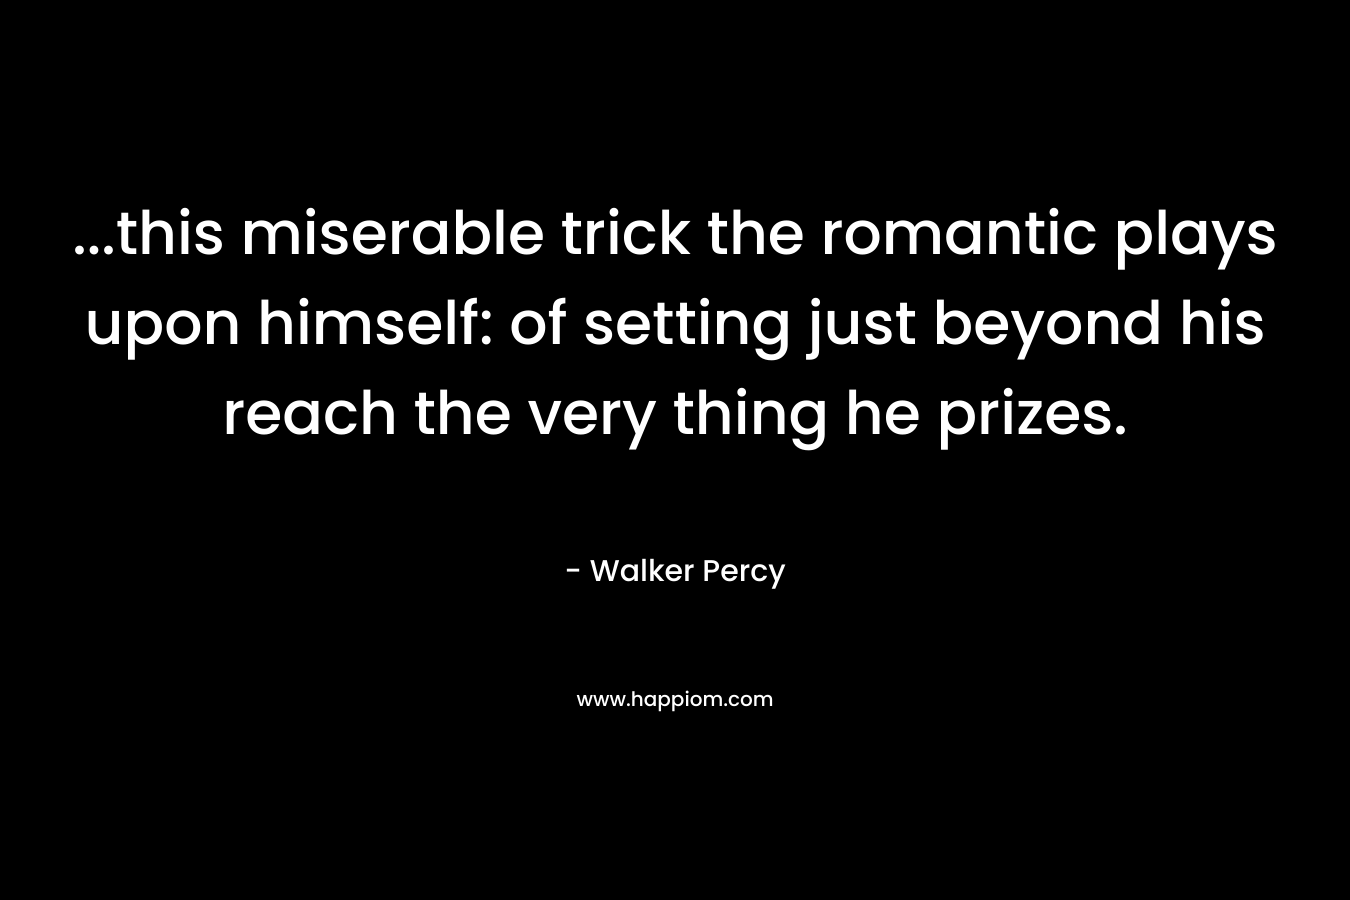 …this miserable trick the romantic plays upon himself: of setting just beyond his reach the very thing he prizes. – Walker Percy